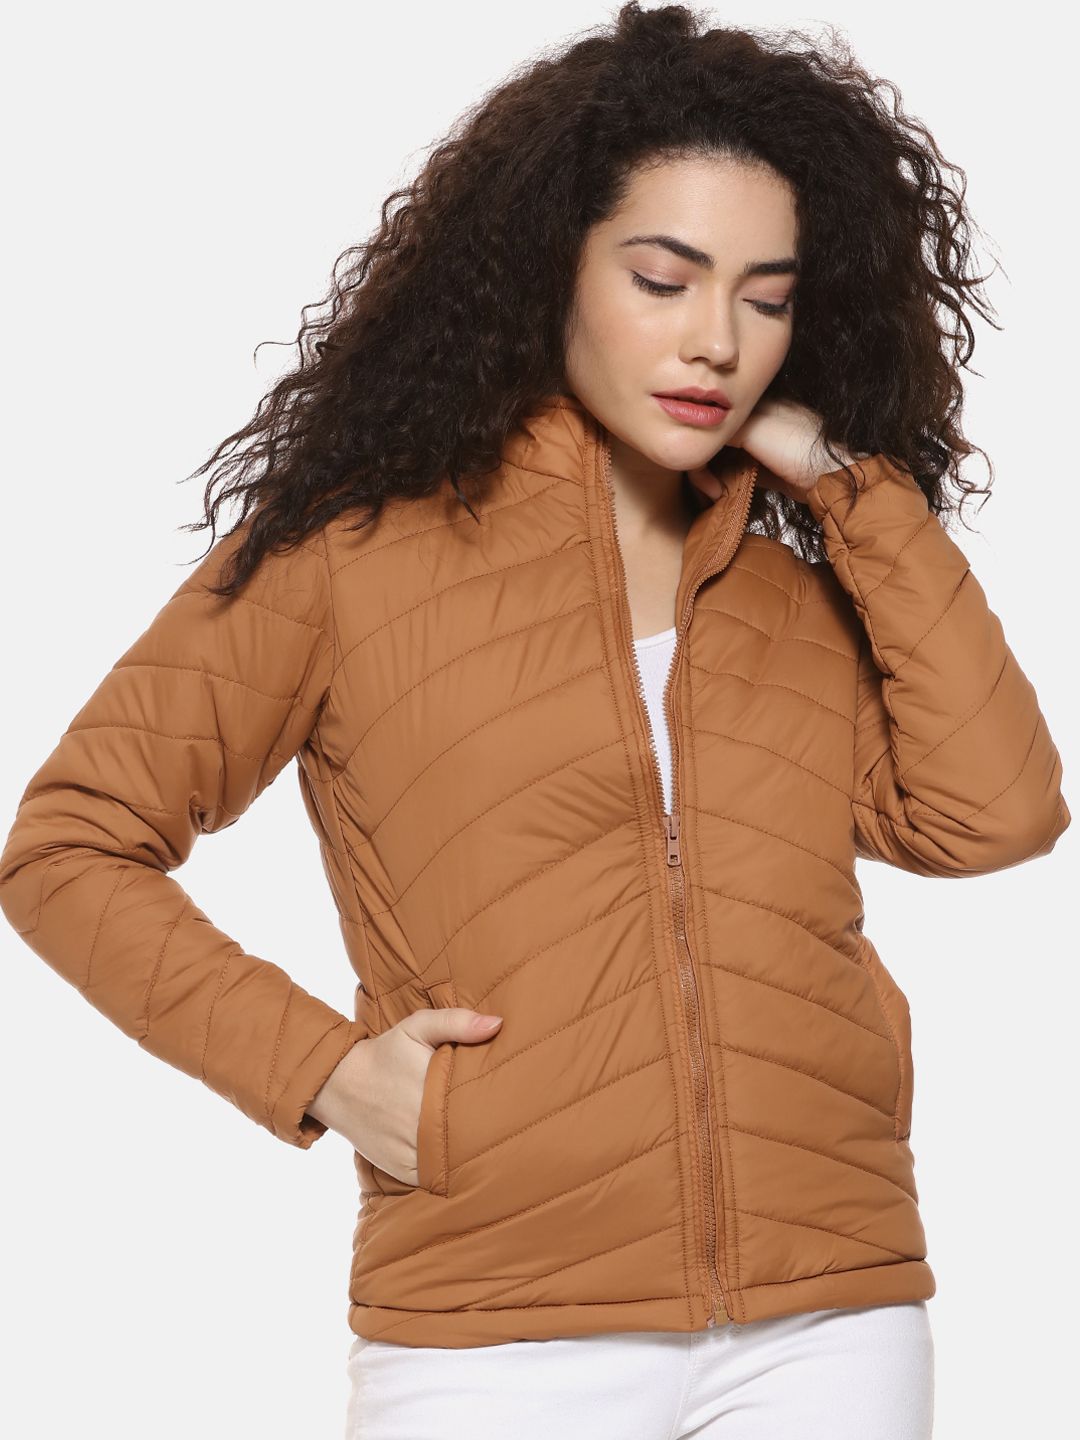 Campus Sutra Women Brown Solid Padded Jacket Price in India